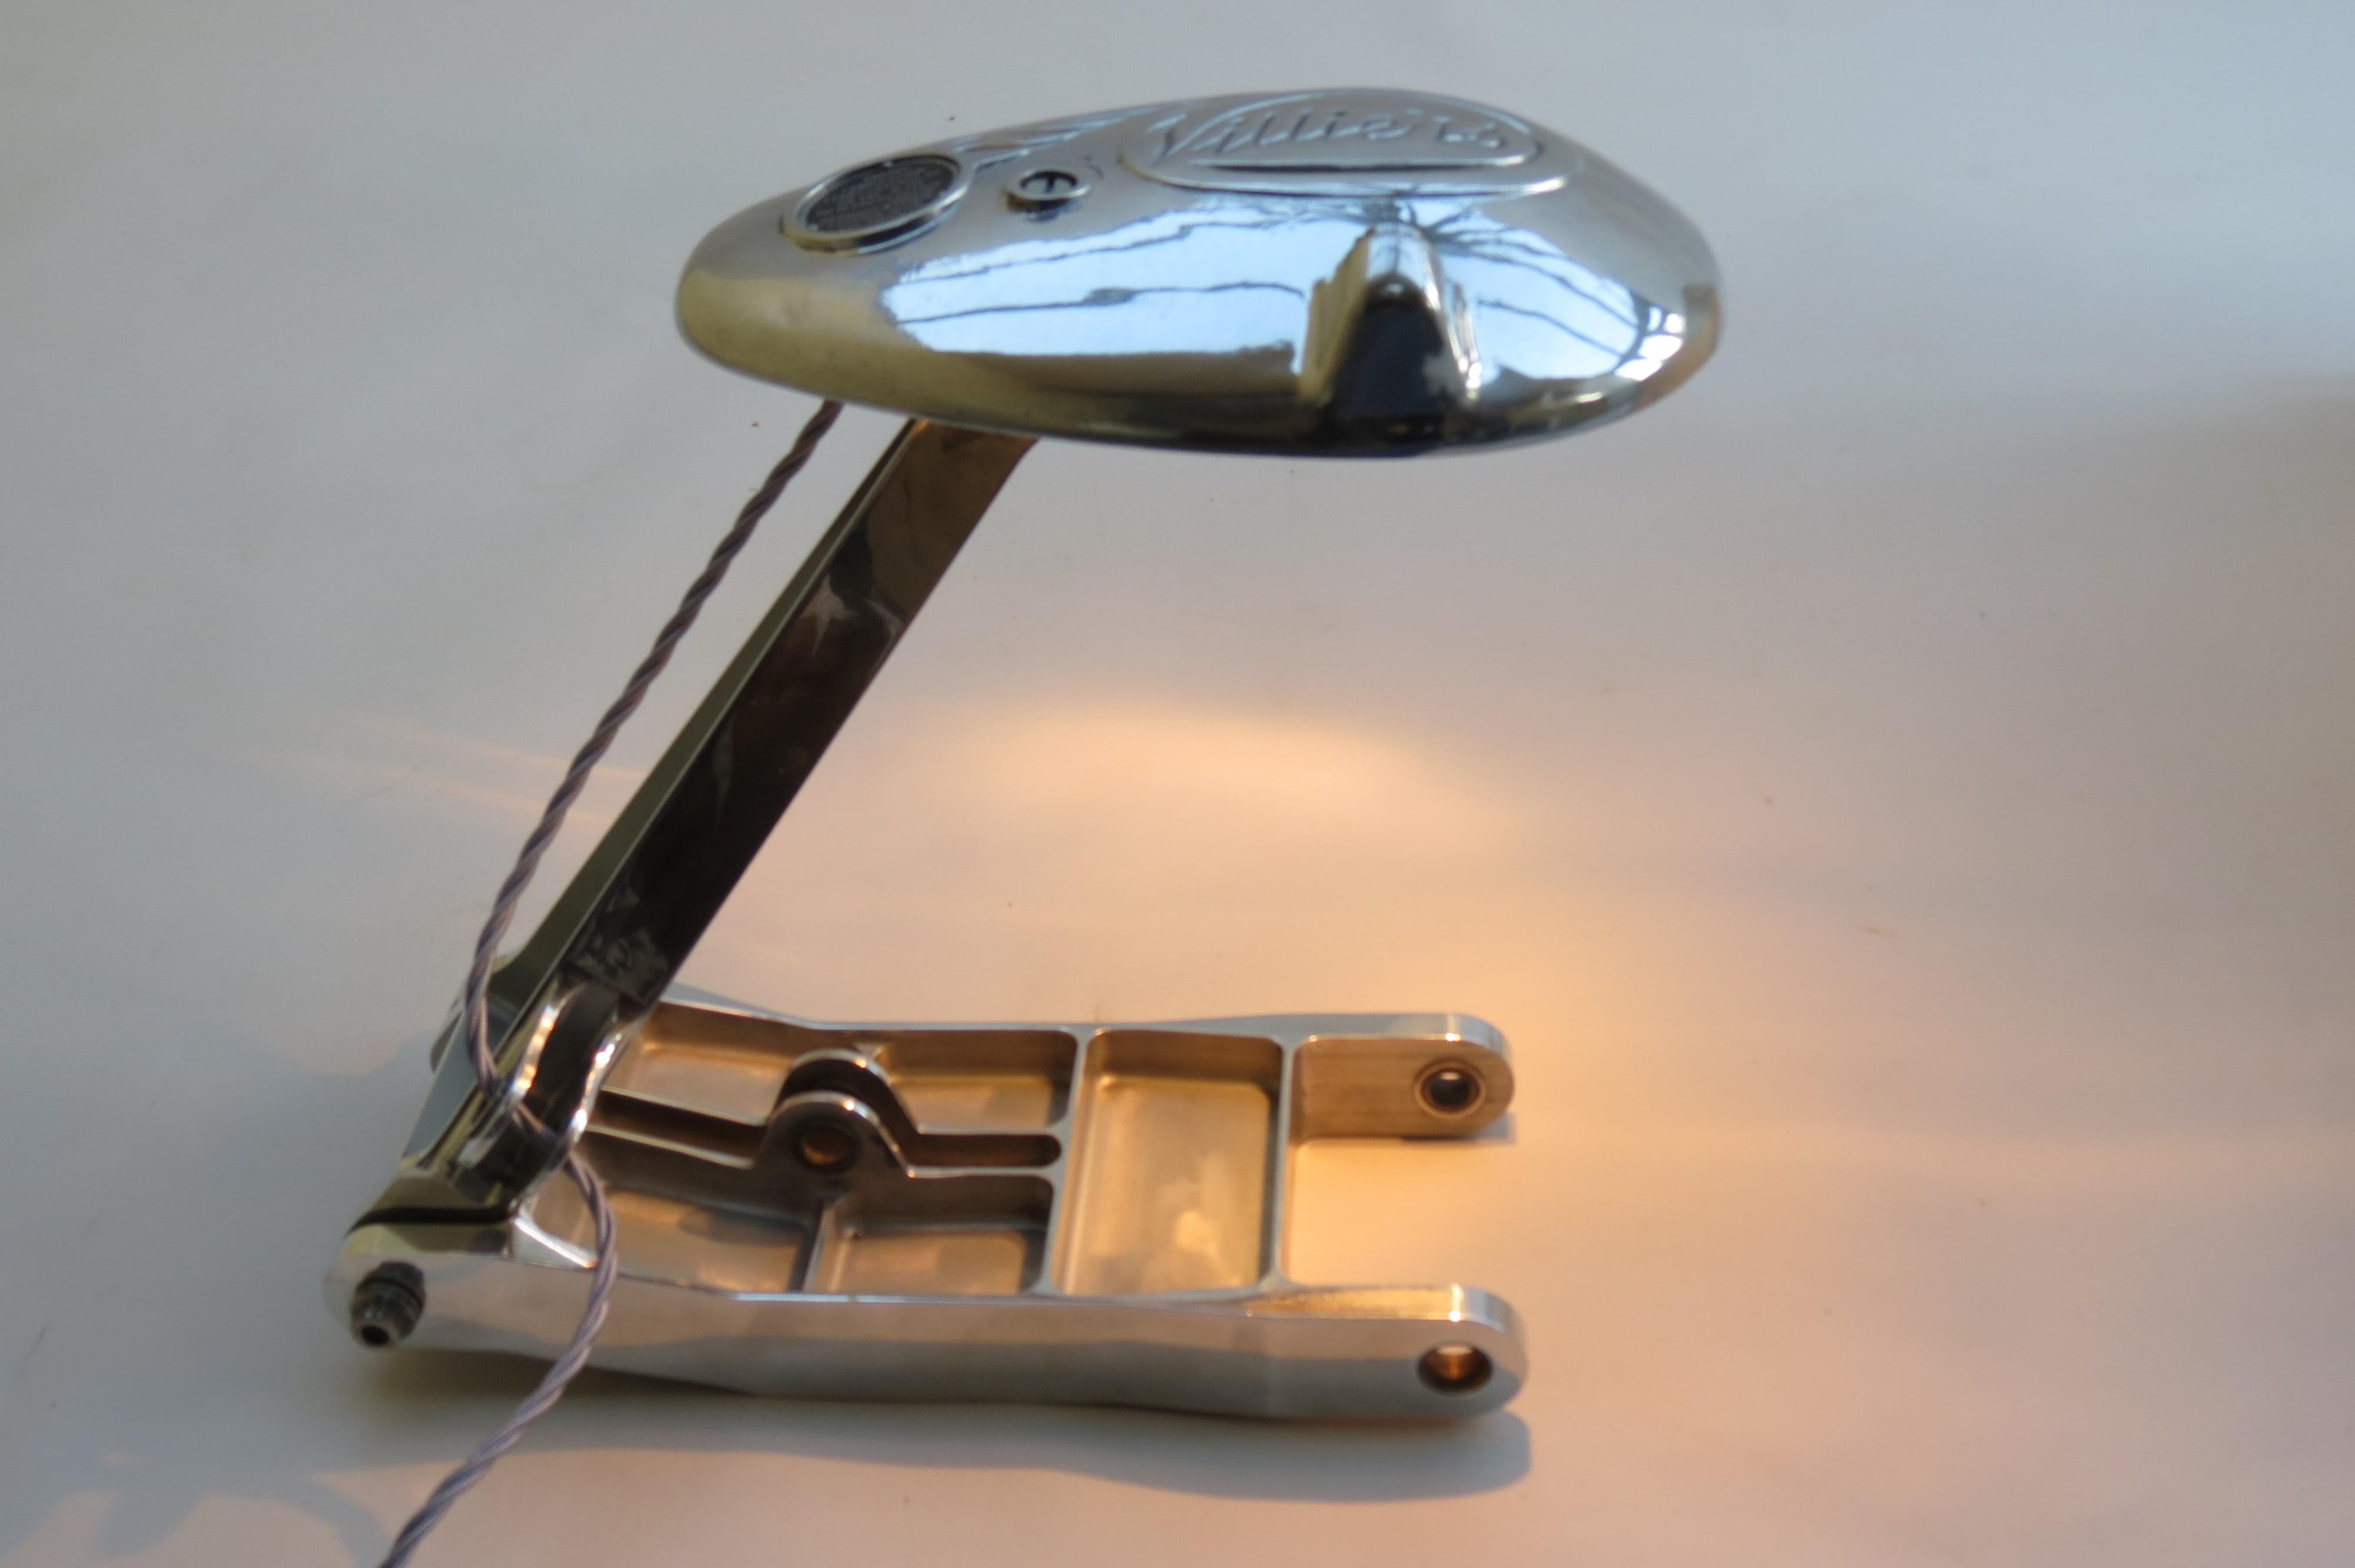 Exceptional quality bespoke made desk lamp.  This lamp is bespoke made using an aluminium Villiers Motorcycle crank case and a Boeing 747 flap arm.  Good quality engineering and a great design.  Newly wired.  A wonderful unique quality desk